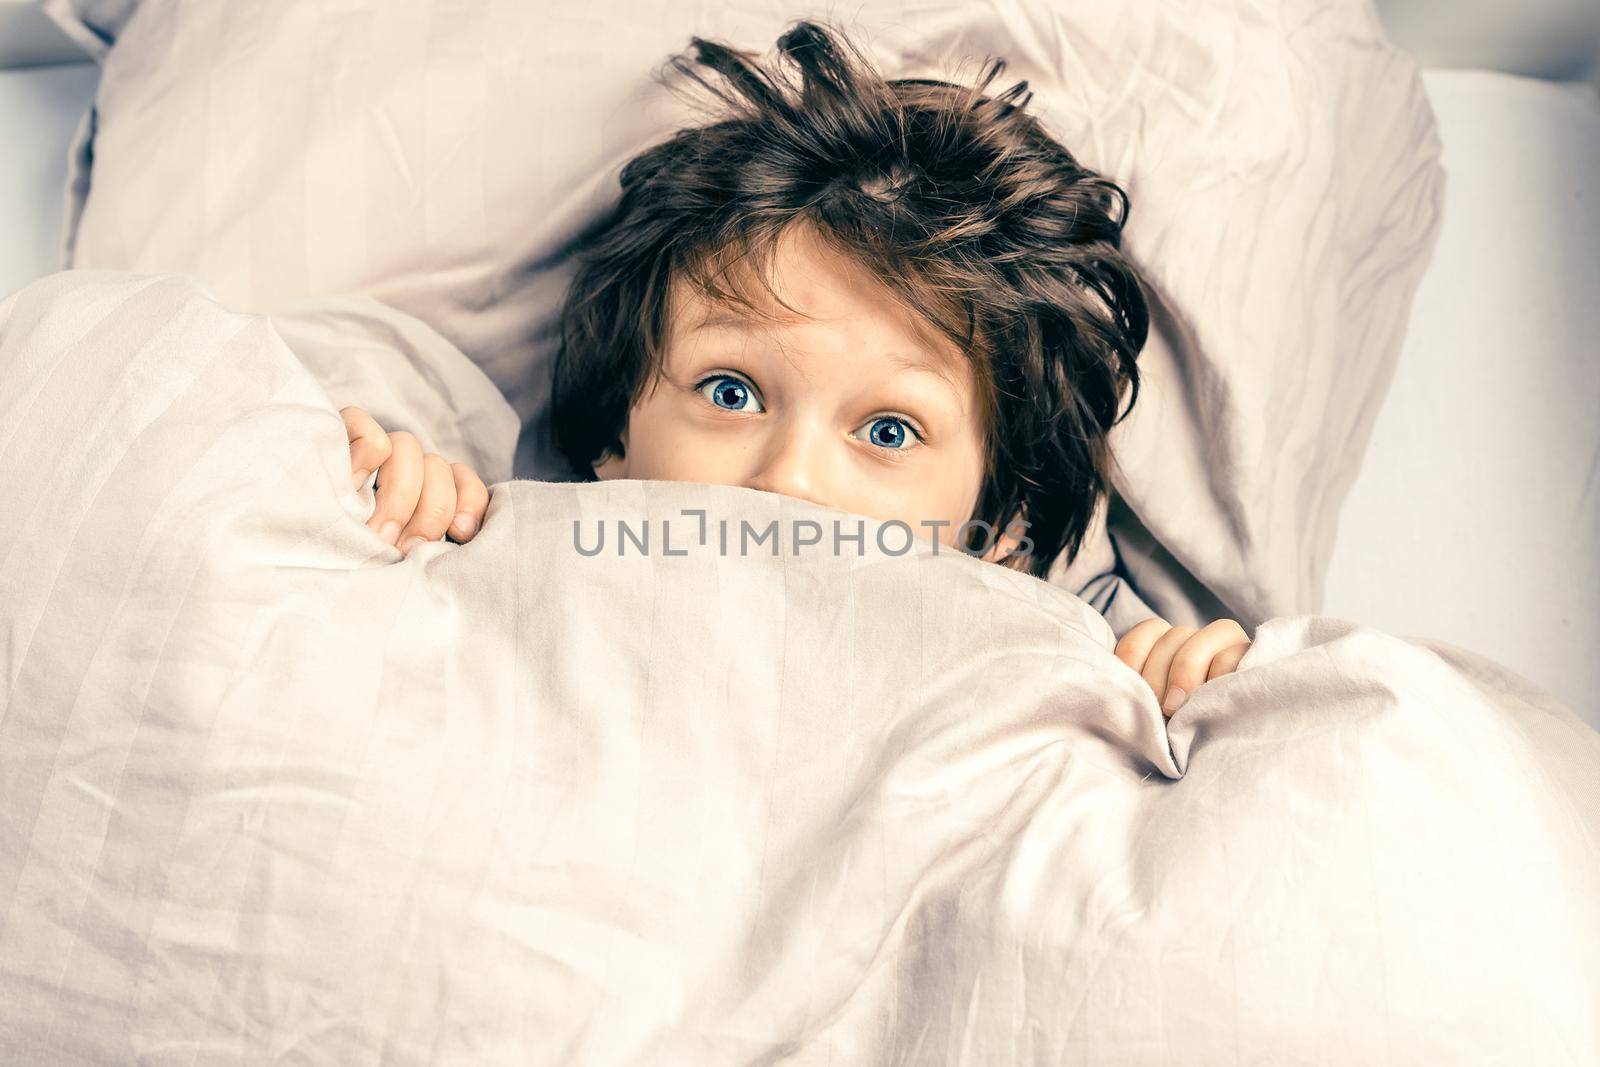 Surprised boy with funny face expression hiding and peeking from a duvet. Kid covering half of his face with blanket. Scared child, afraid of night monsters